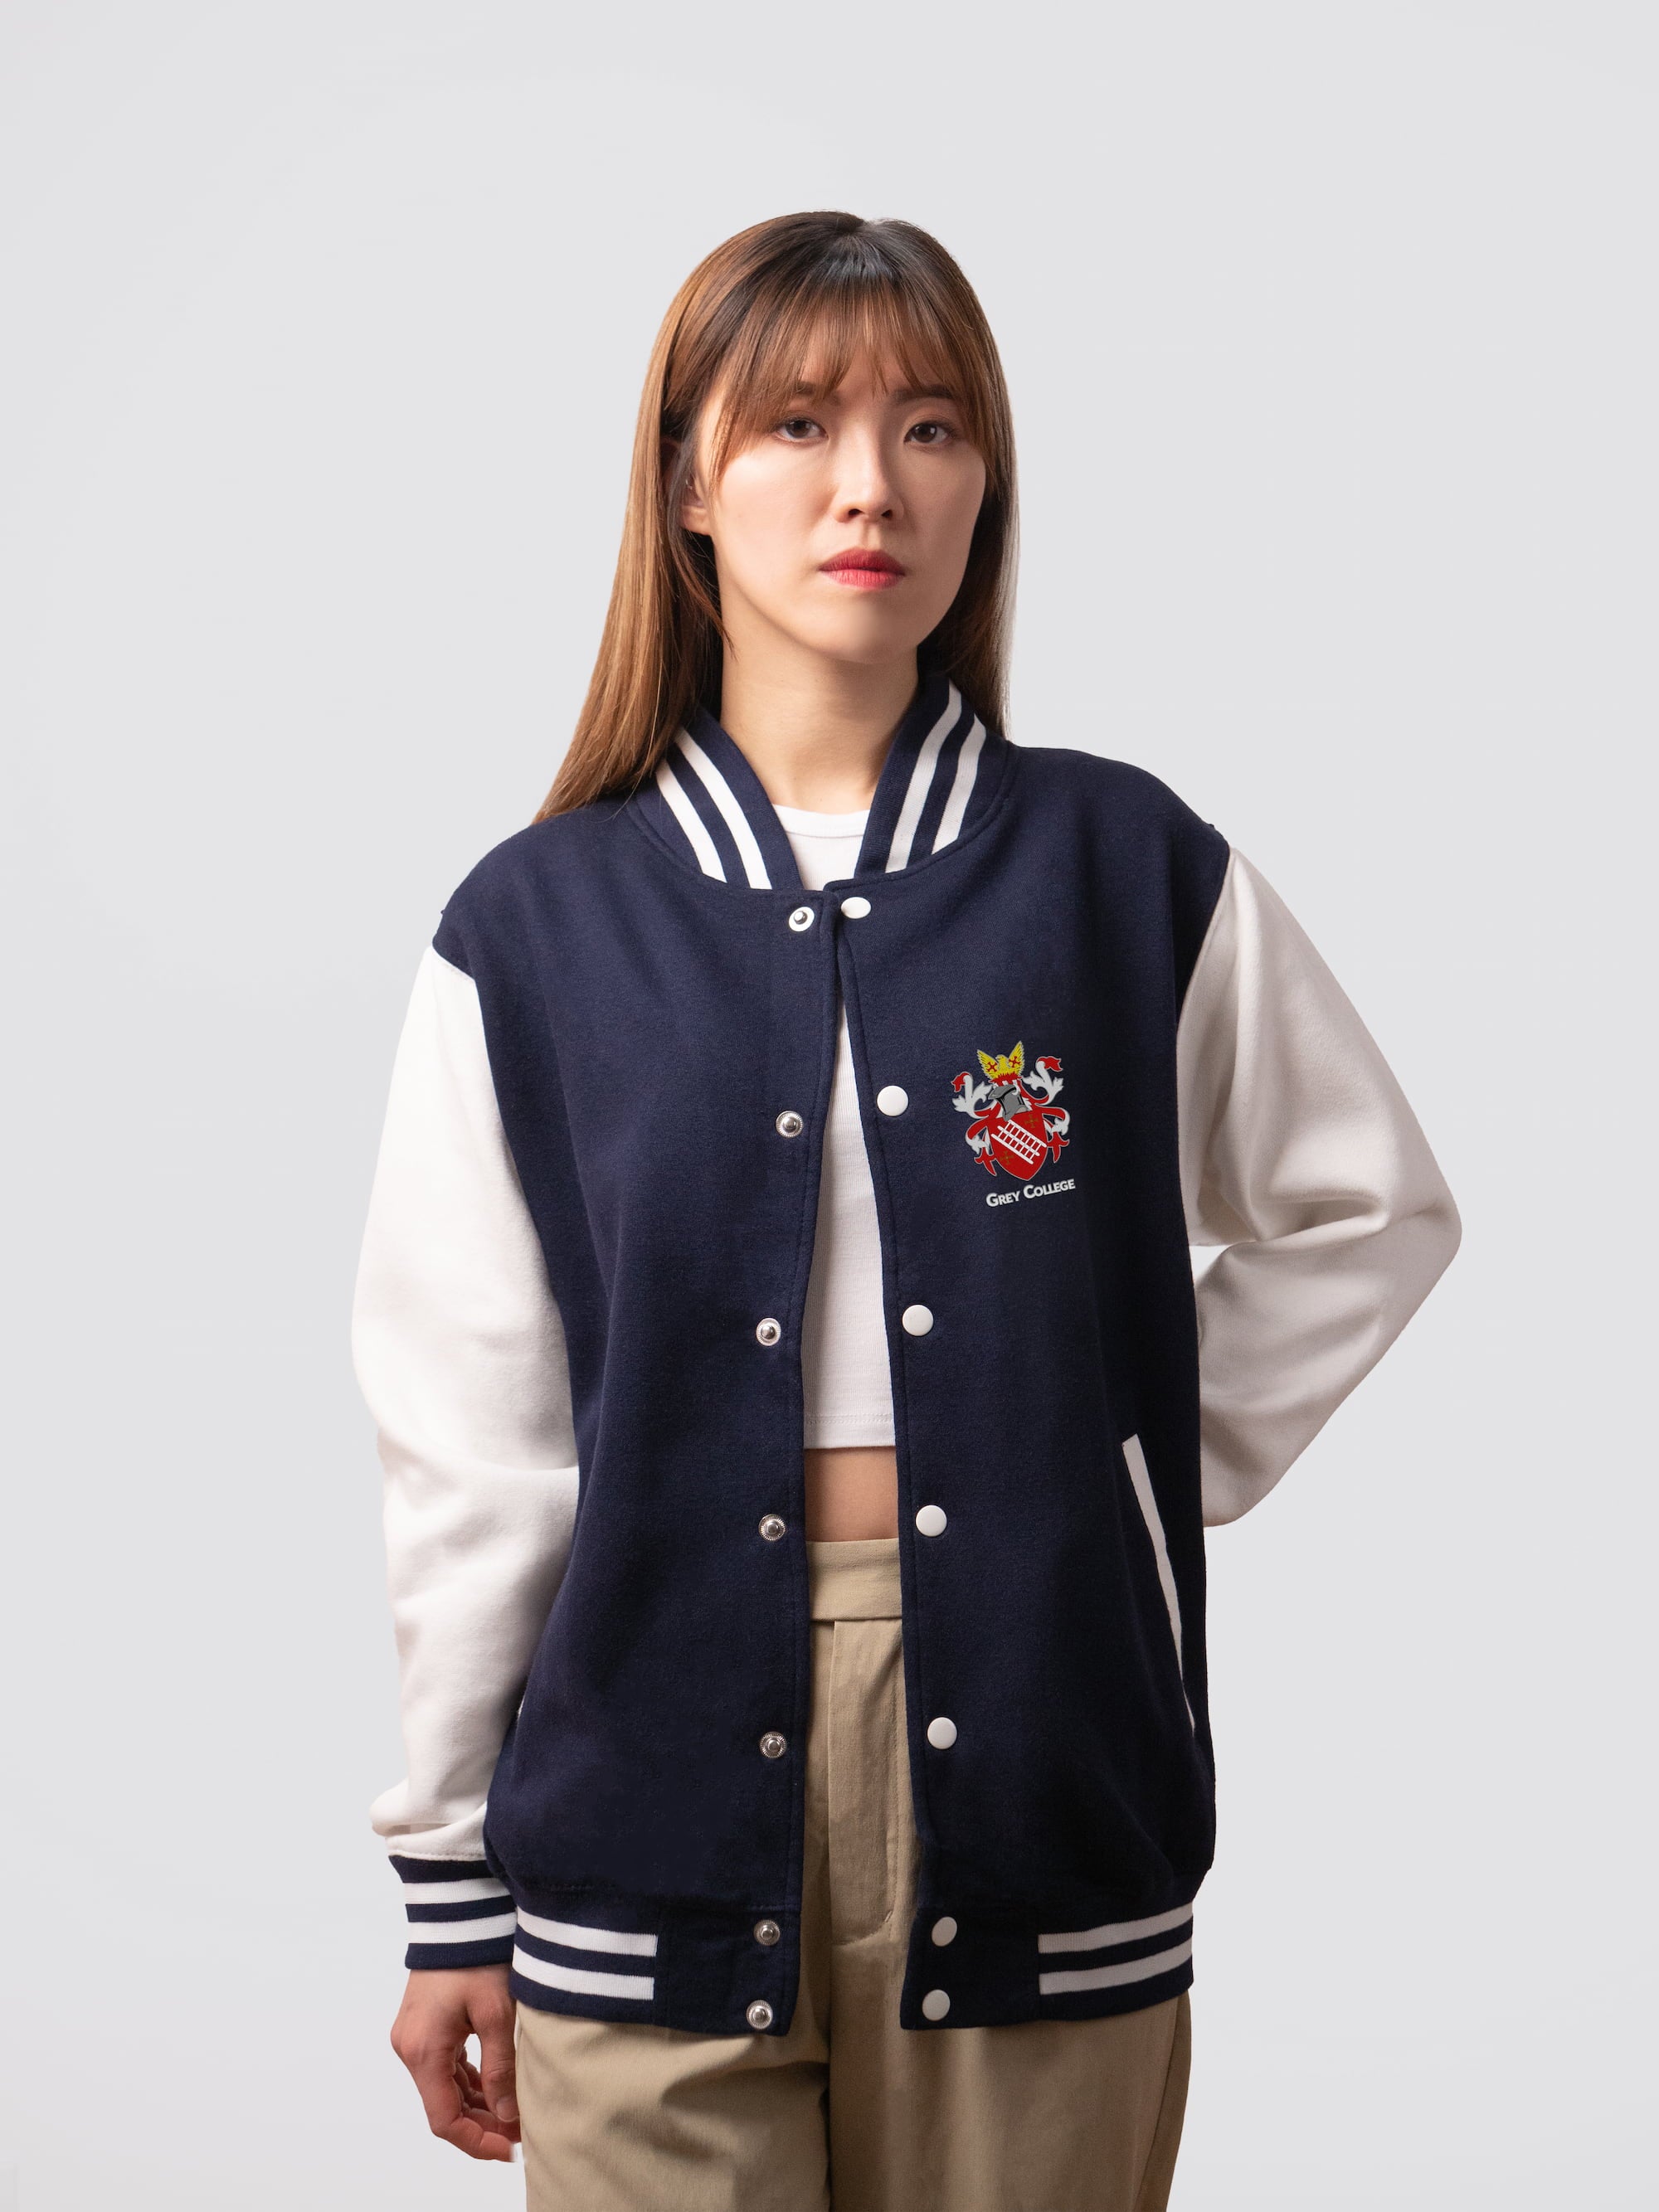 Retro style varsity jacket, with embroidered Grey College crest